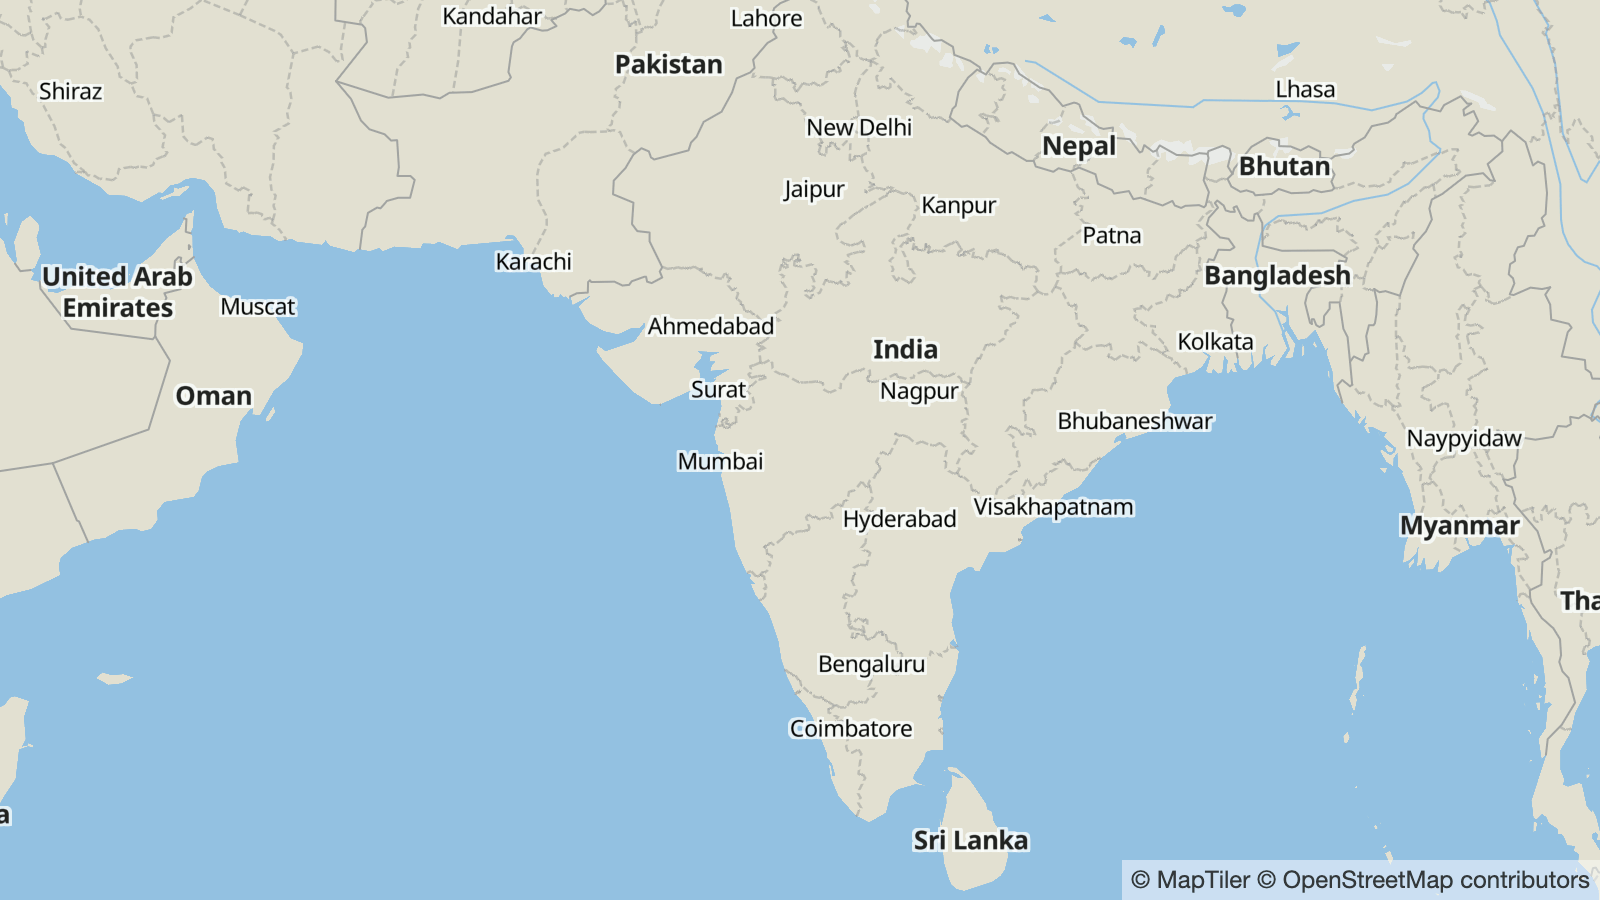 English, Hindi, and Tamil labels on the map of India